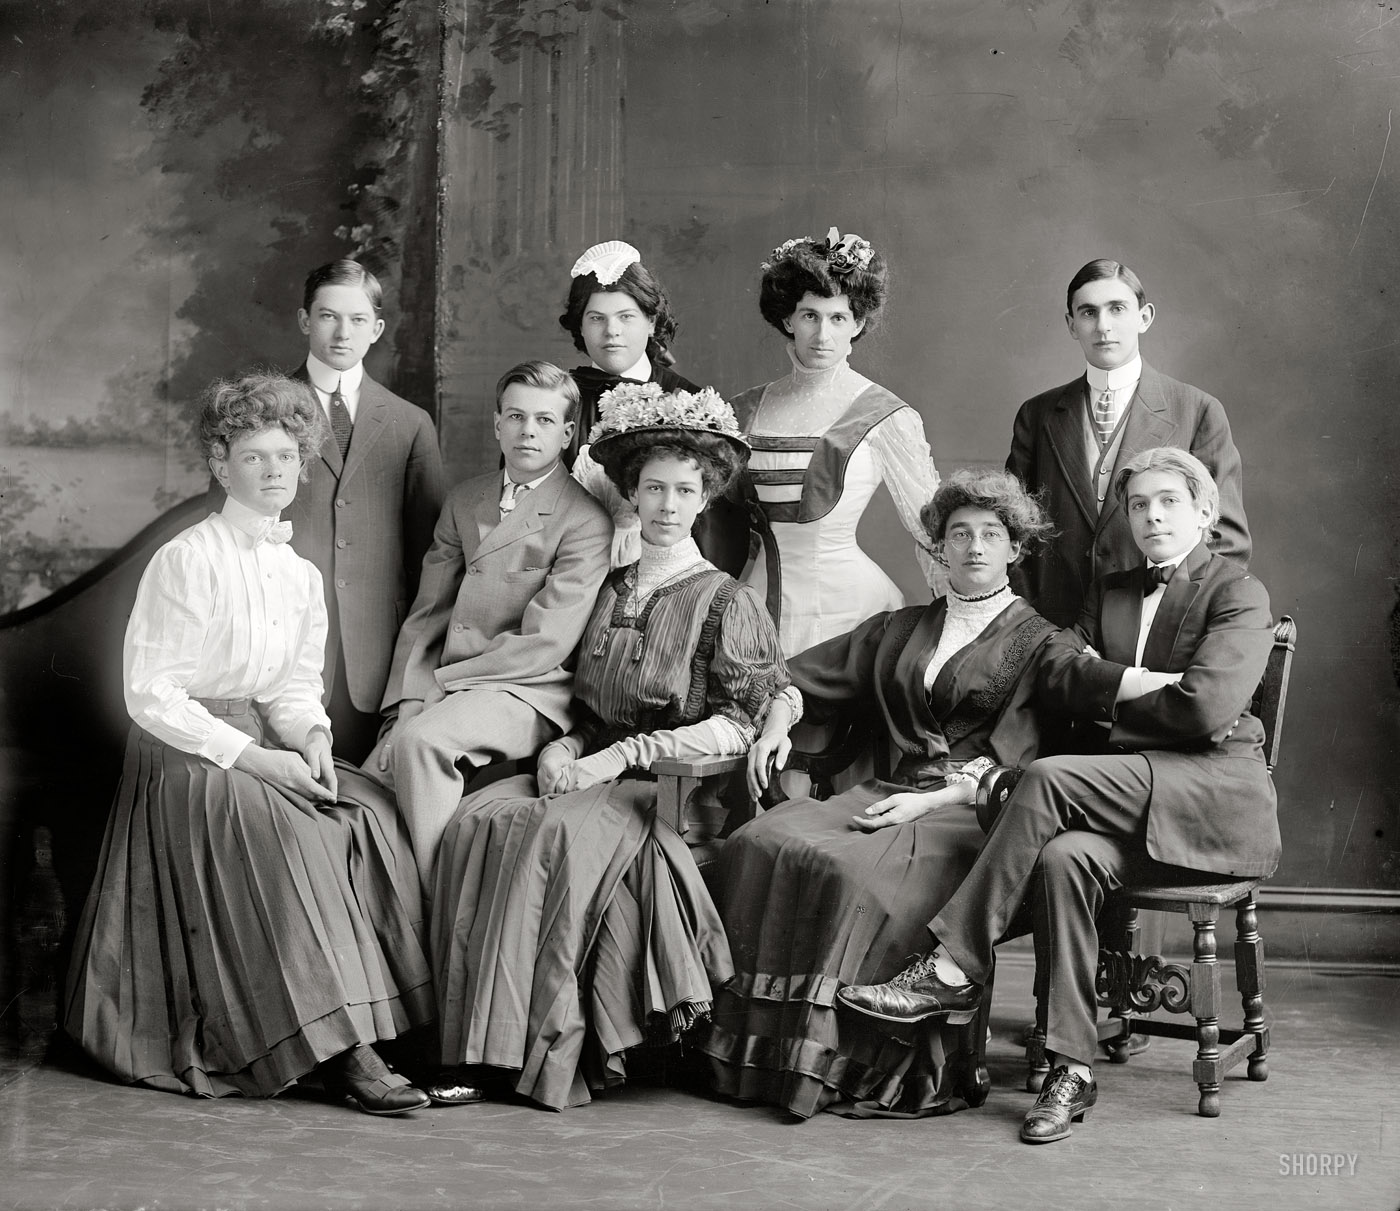 Circa 1910. "Washington School for Boys." Our second look these young men, and the lovely young women they've become. H&E glass negative. View full size.